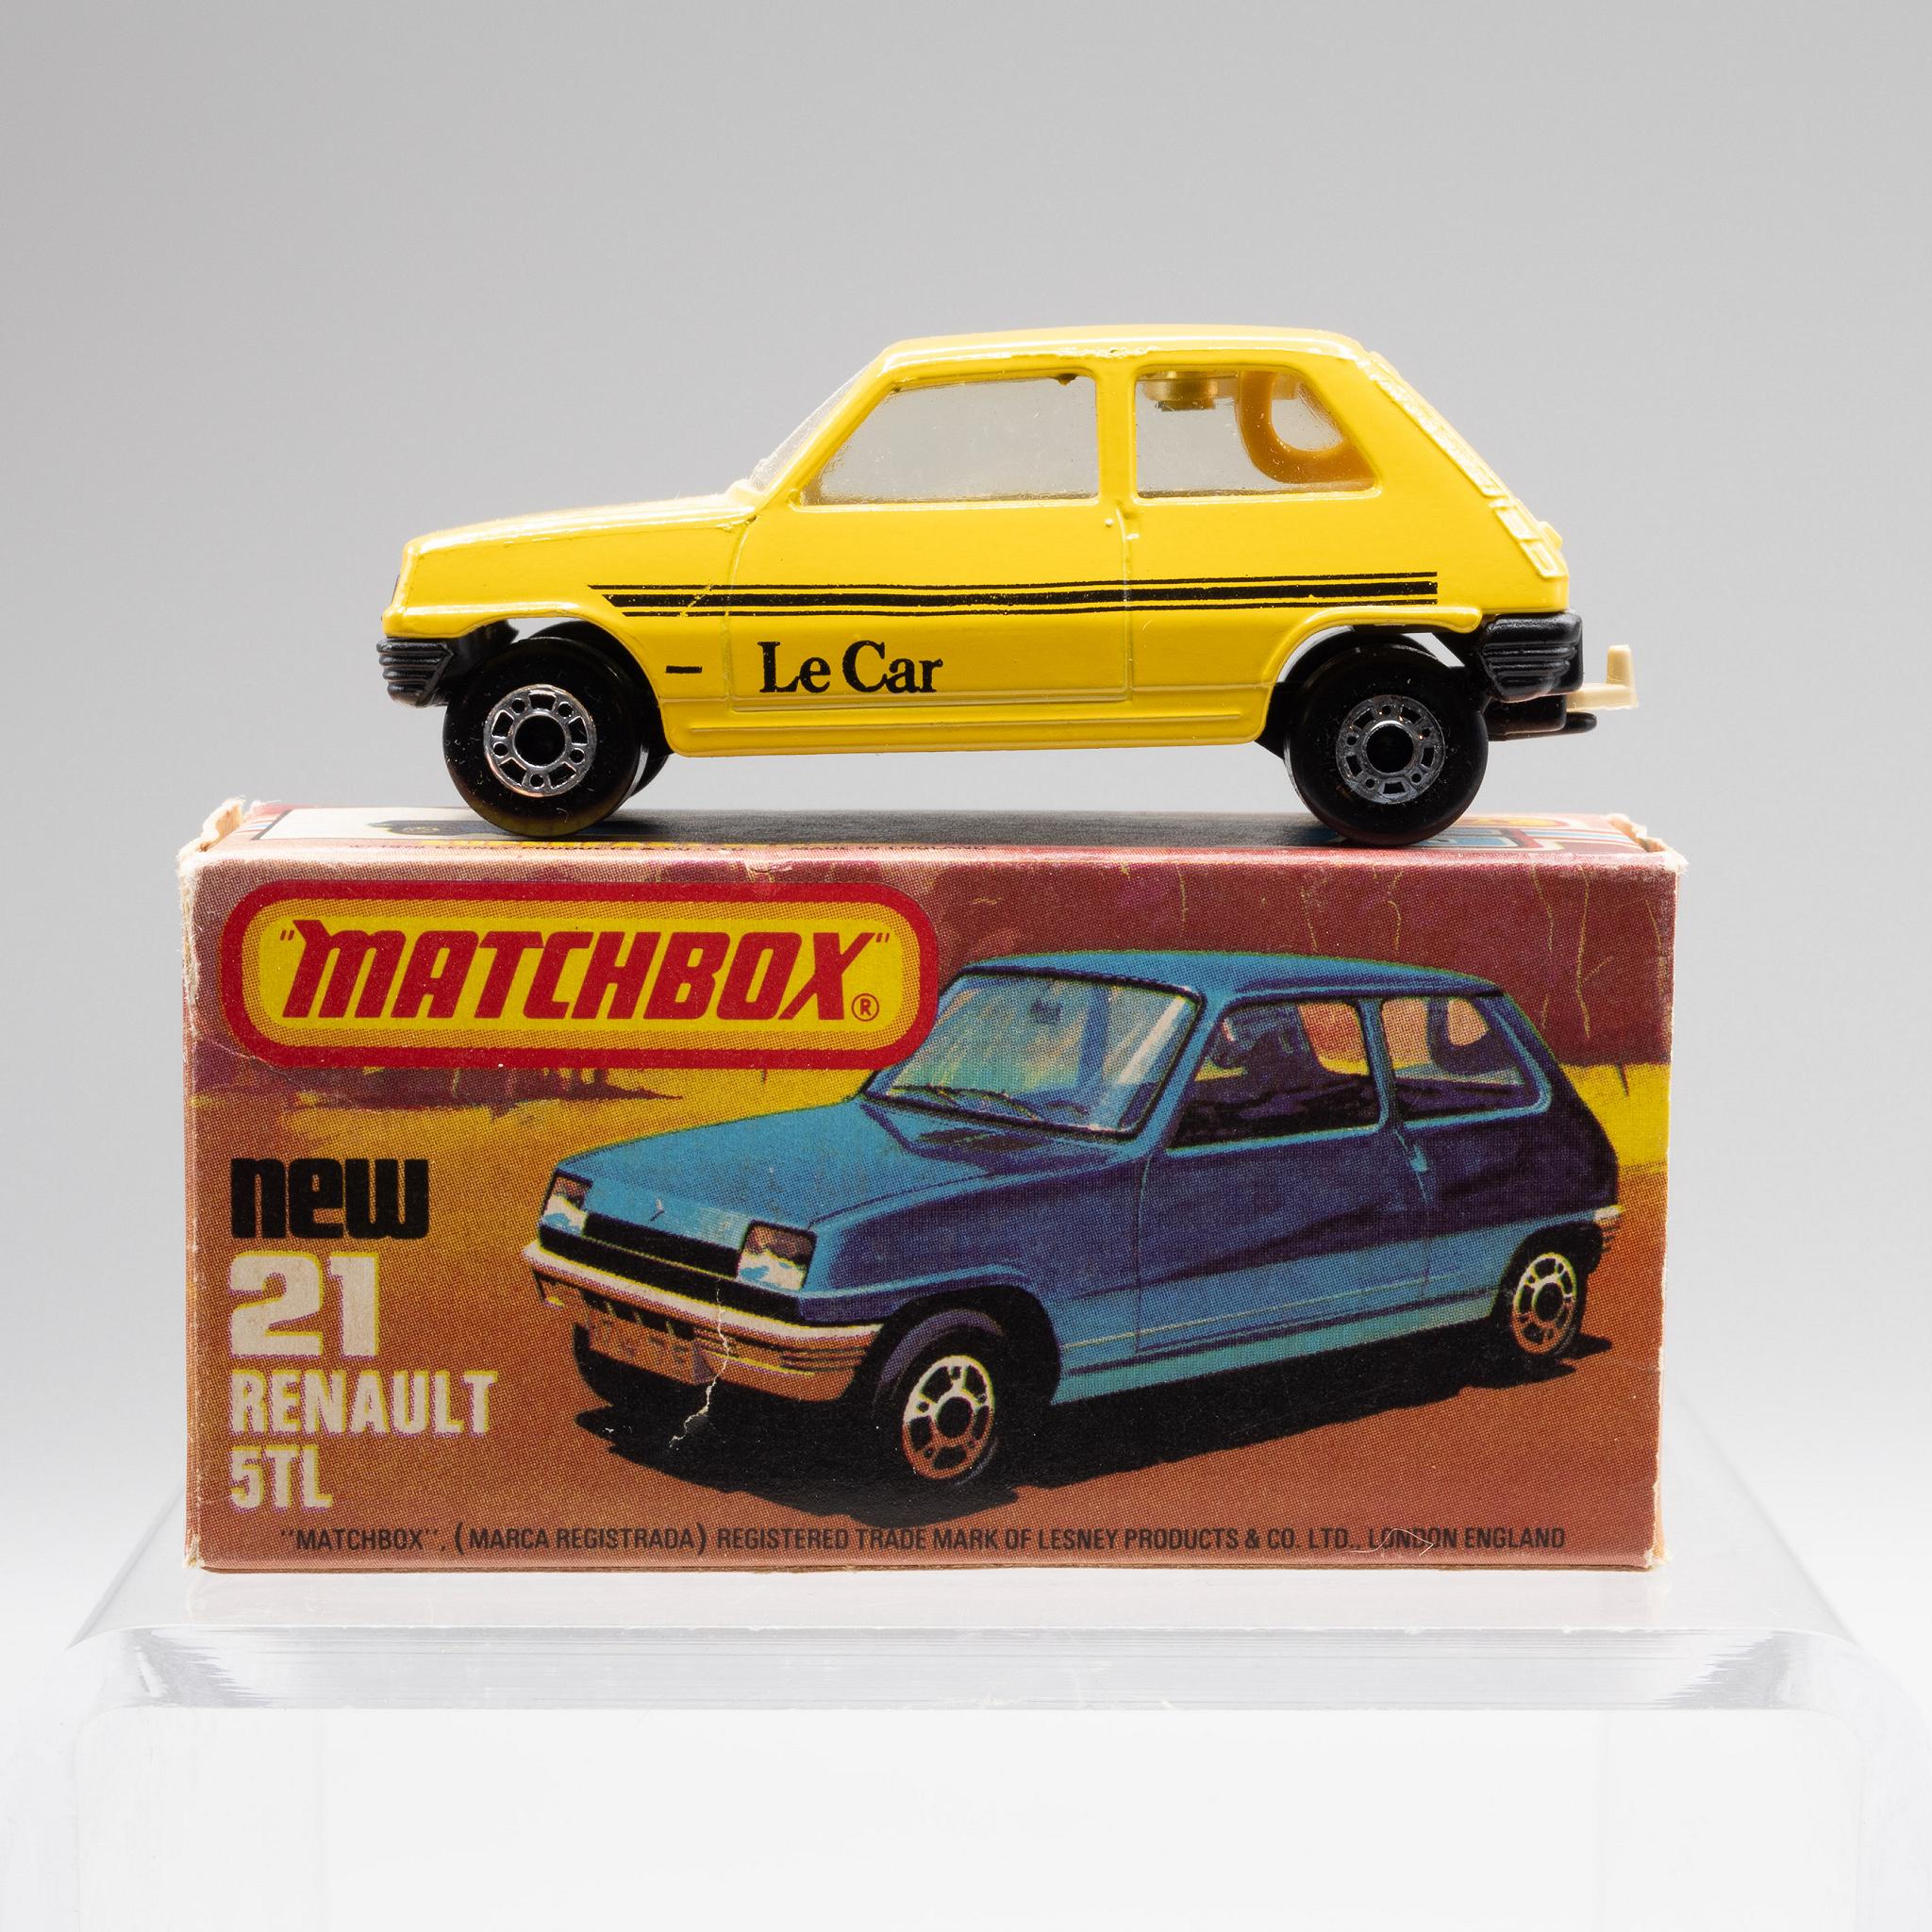 Matchbox+Superfast+21+Renault+5TL+in+Box+Yellow+Le+Car picture 1